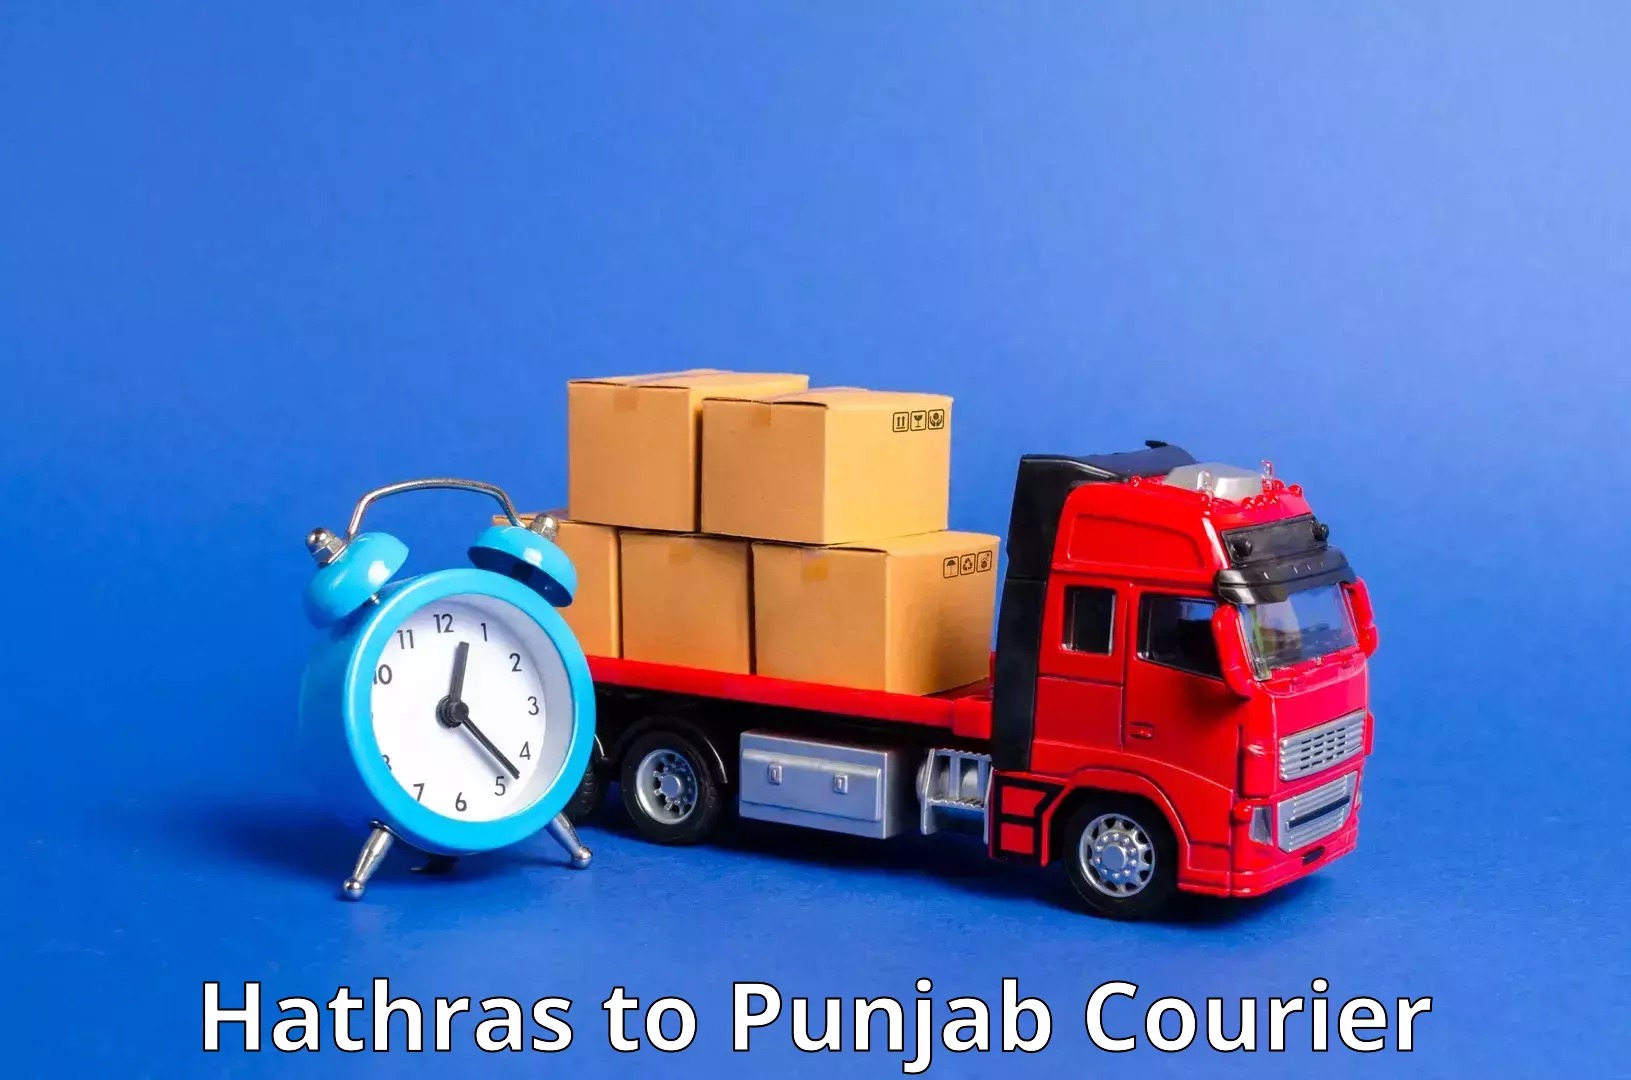 Professional courier handling Hathras to Mohali